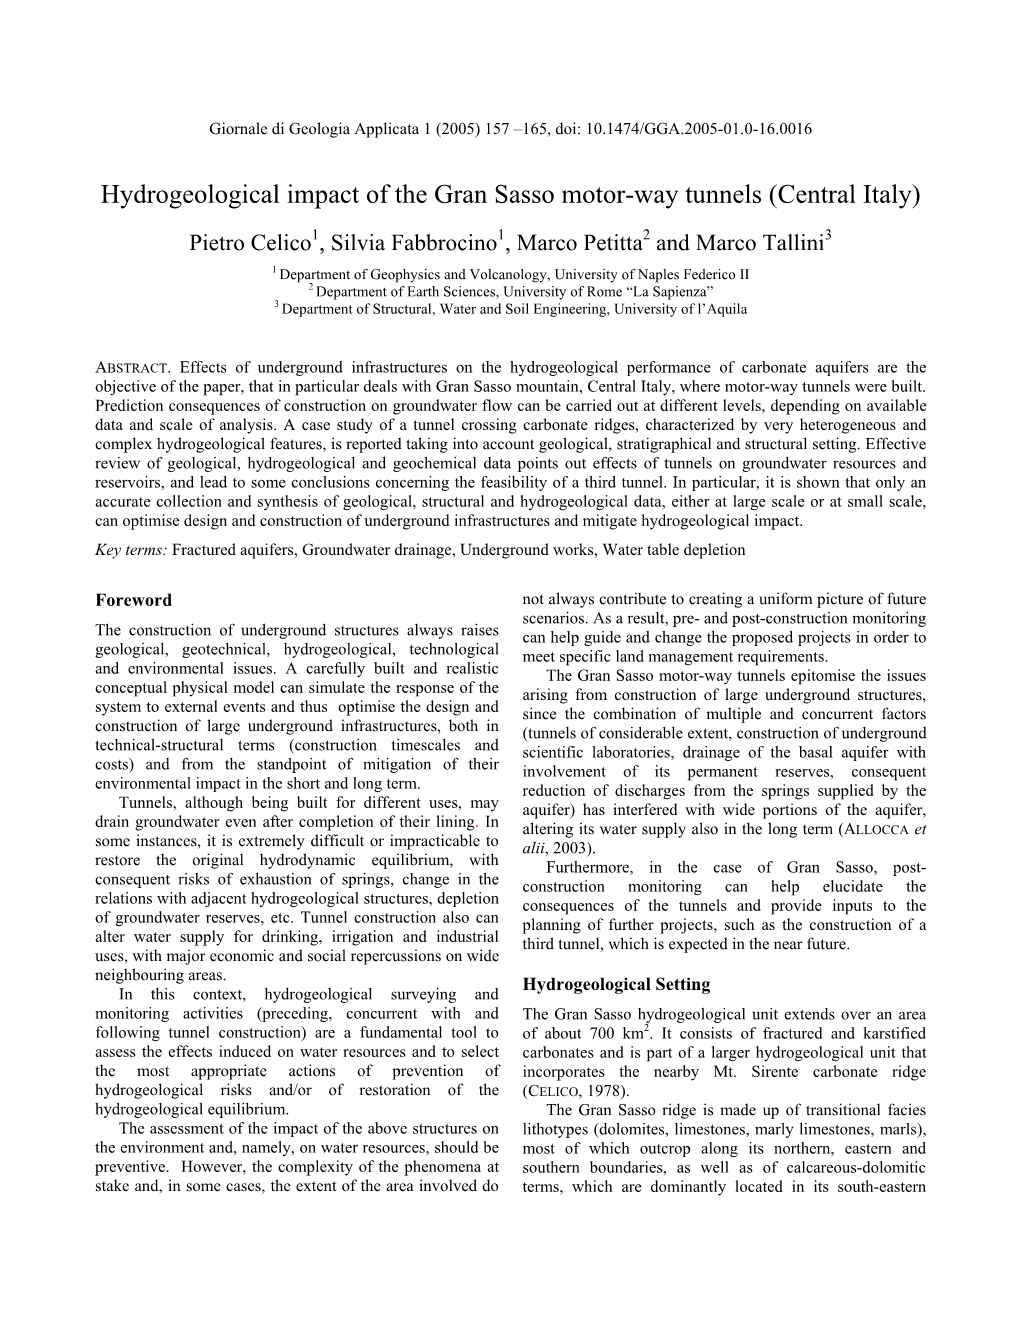 Hydrogeological Impact of the Gran Sasso Motor-Way Tunnels (Central Italy)